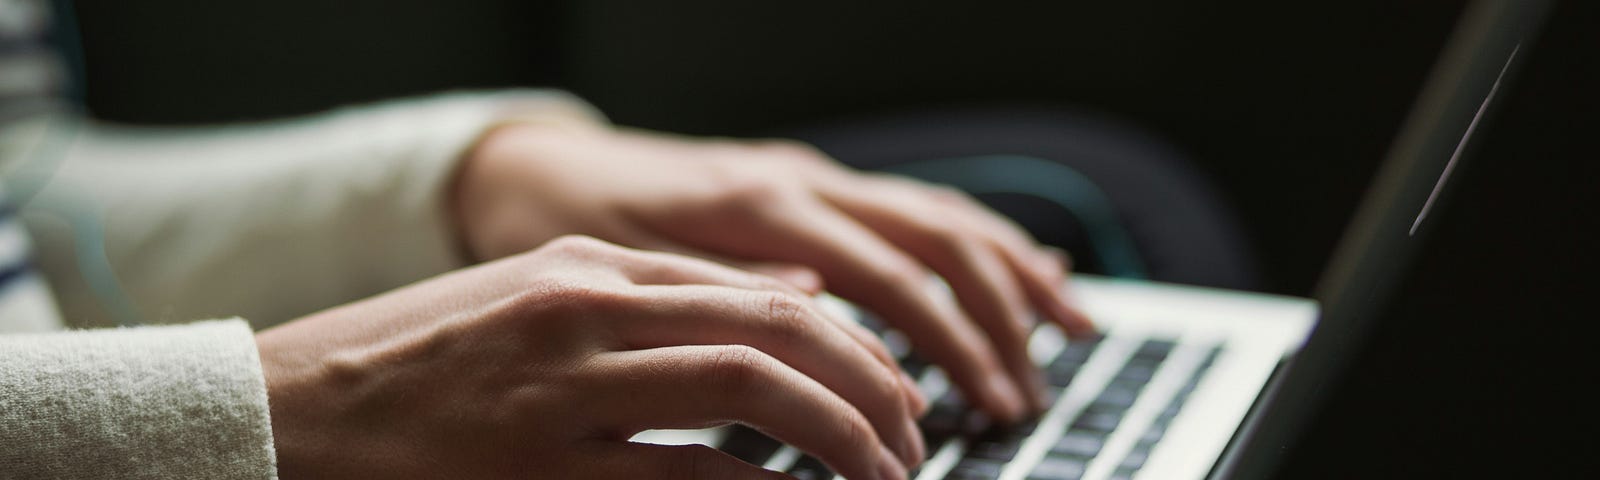 Person’s forearms and hands shown typing on a laptop. The background is dark.